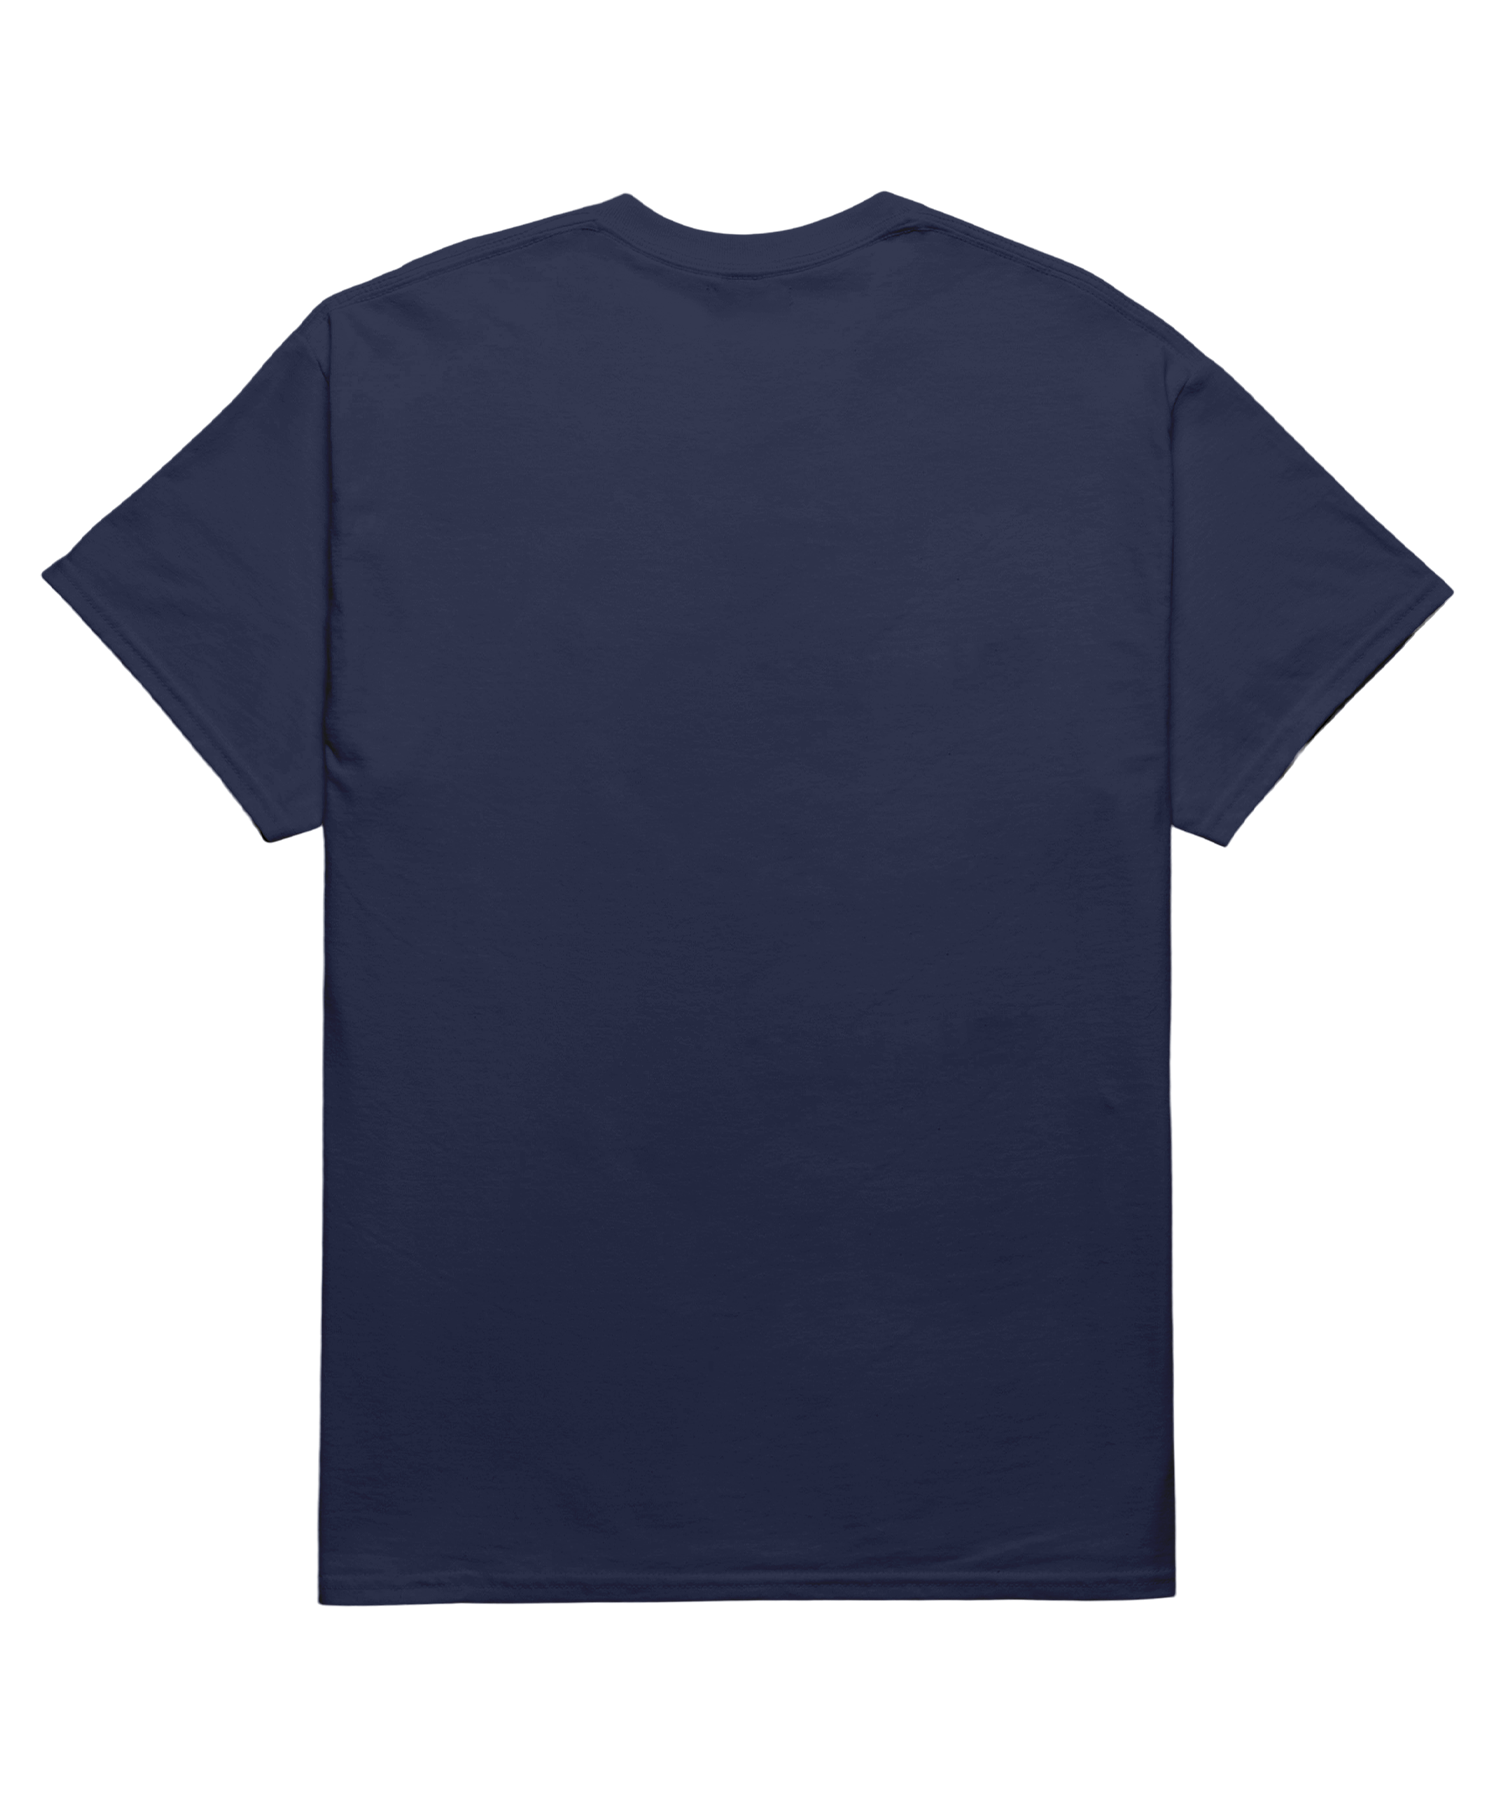 Pat Campaign Tee Navy